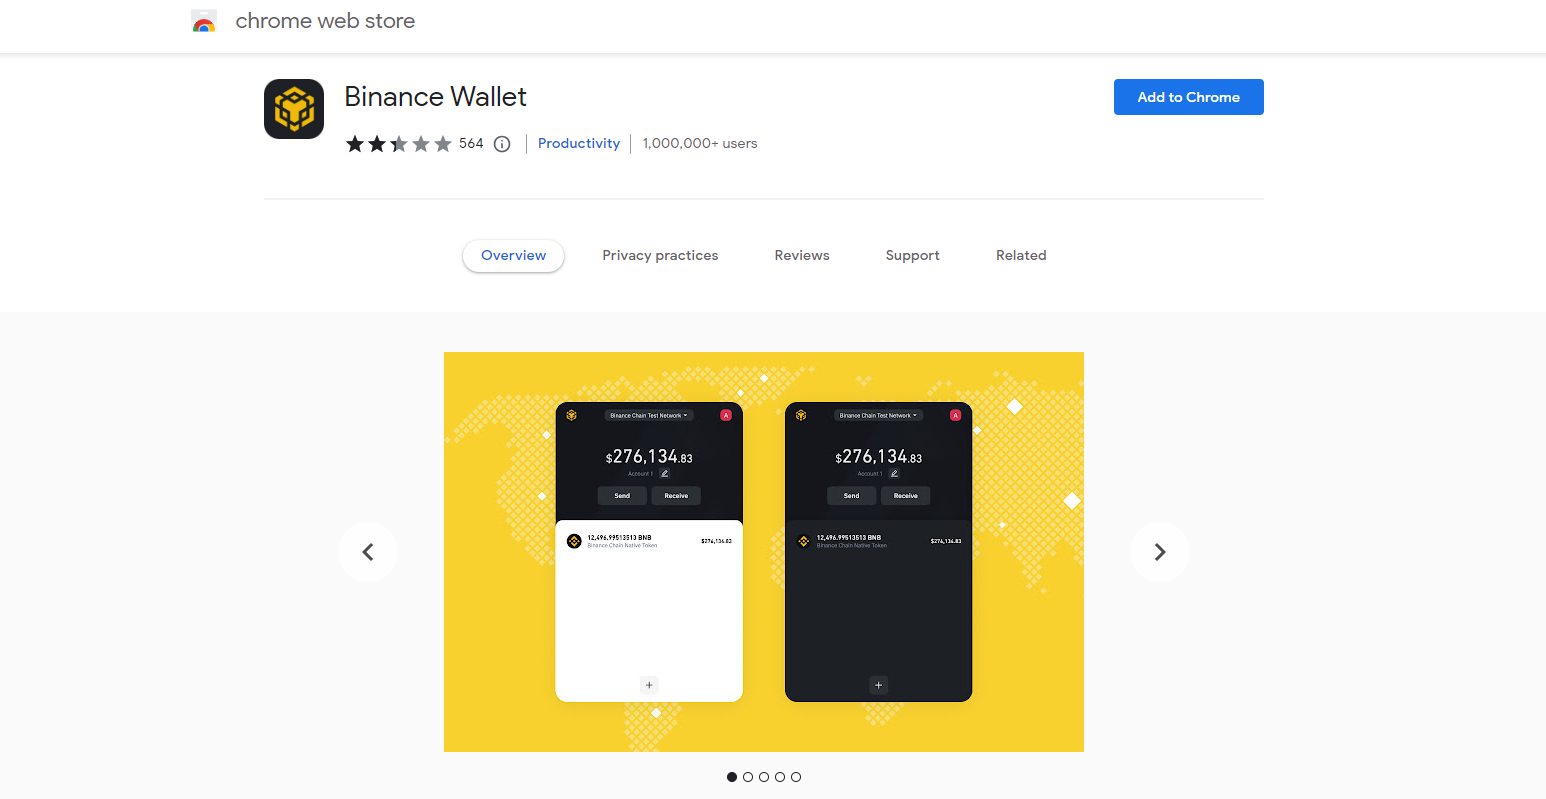 Binance Wallet Chrome extension download page